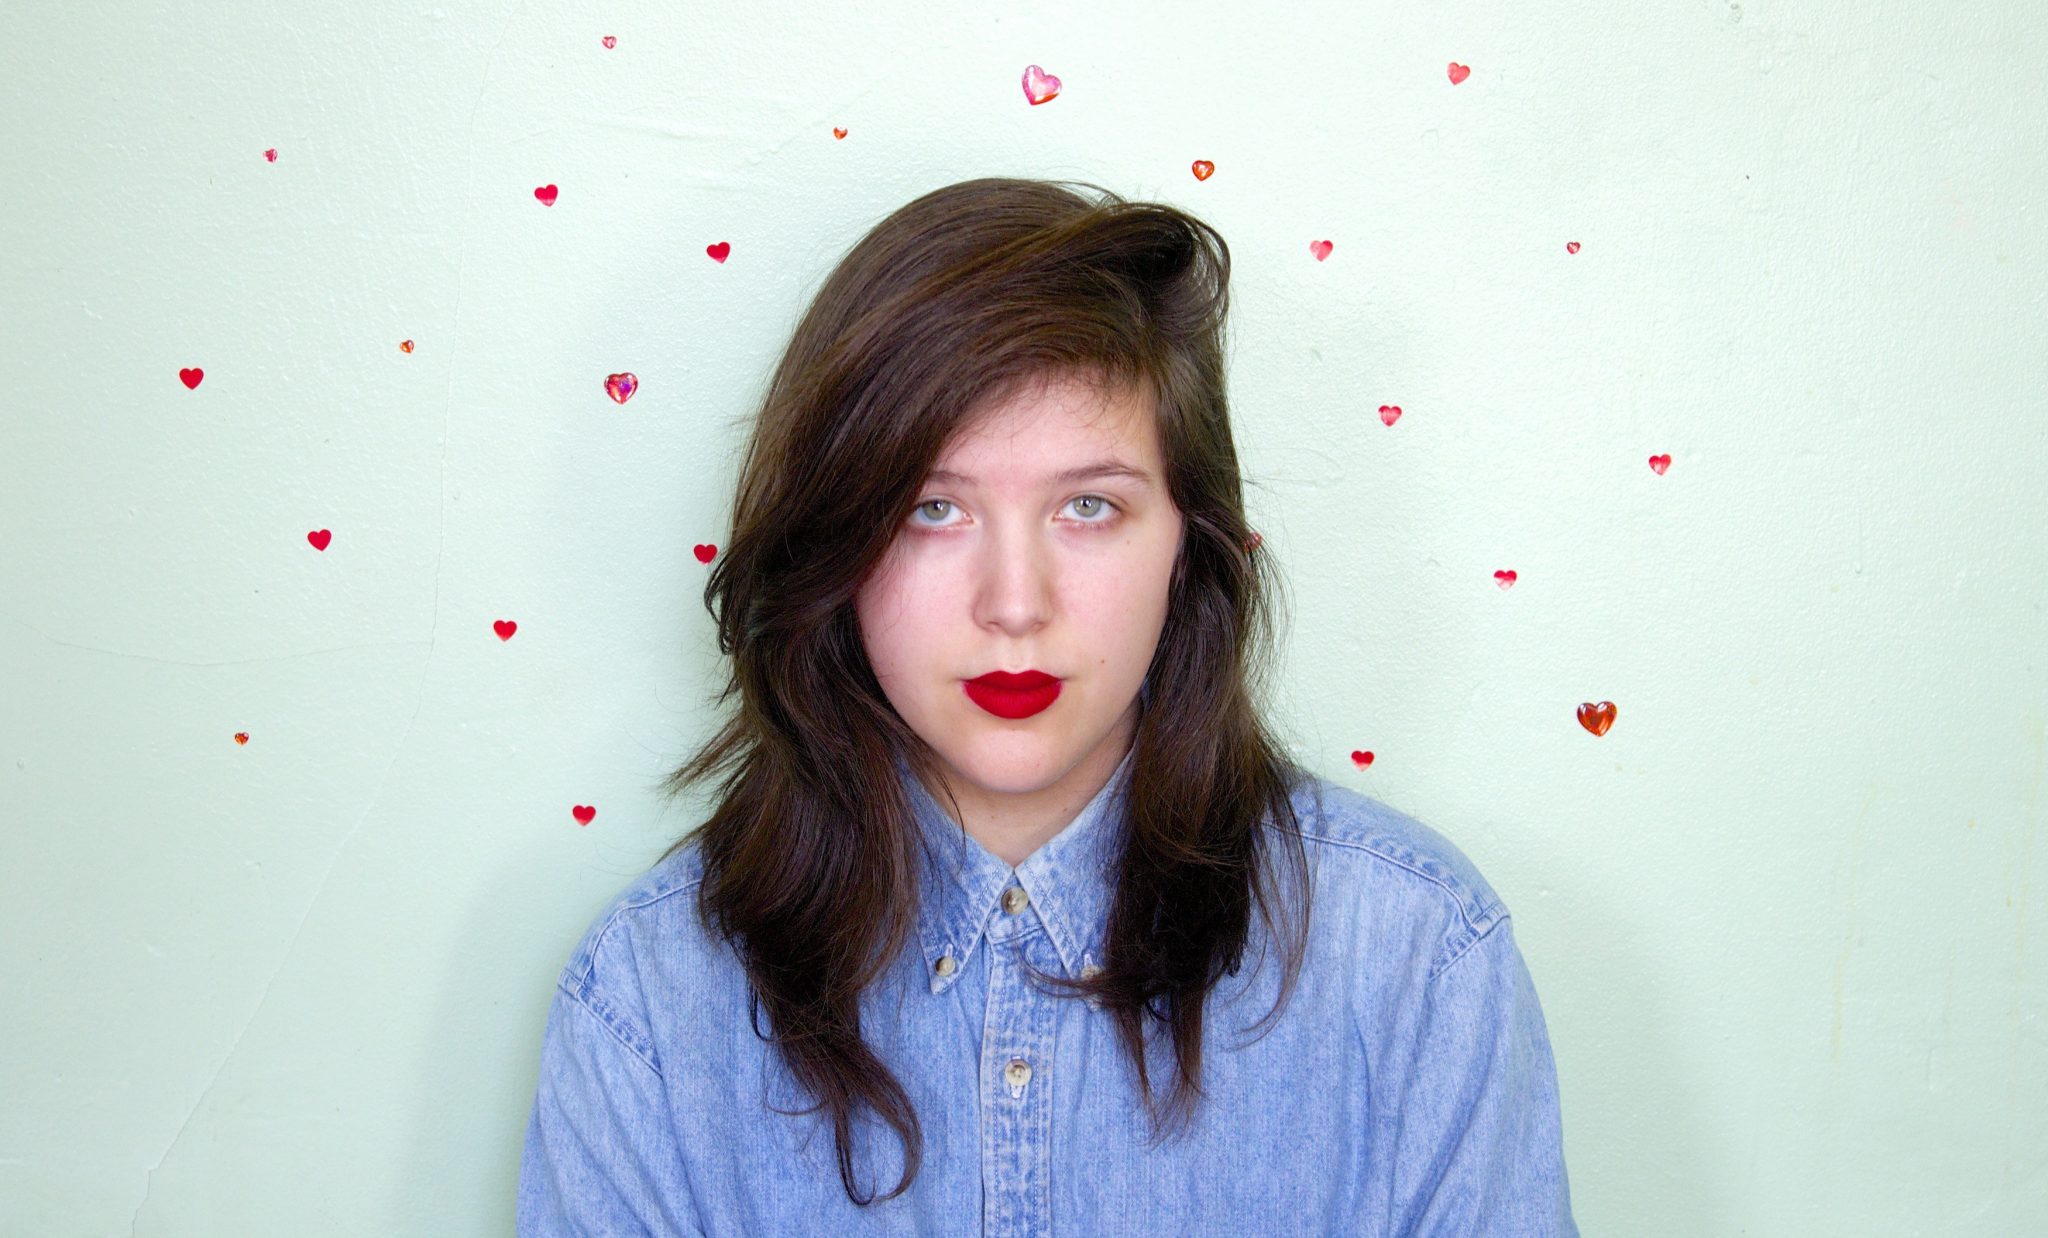 Lucy Dacus - I put the demo of Night Shift up on Bandcamp today only cuz  Matador Records is waiving their share, and all profits are going directly  to the Seeding Sovereignty